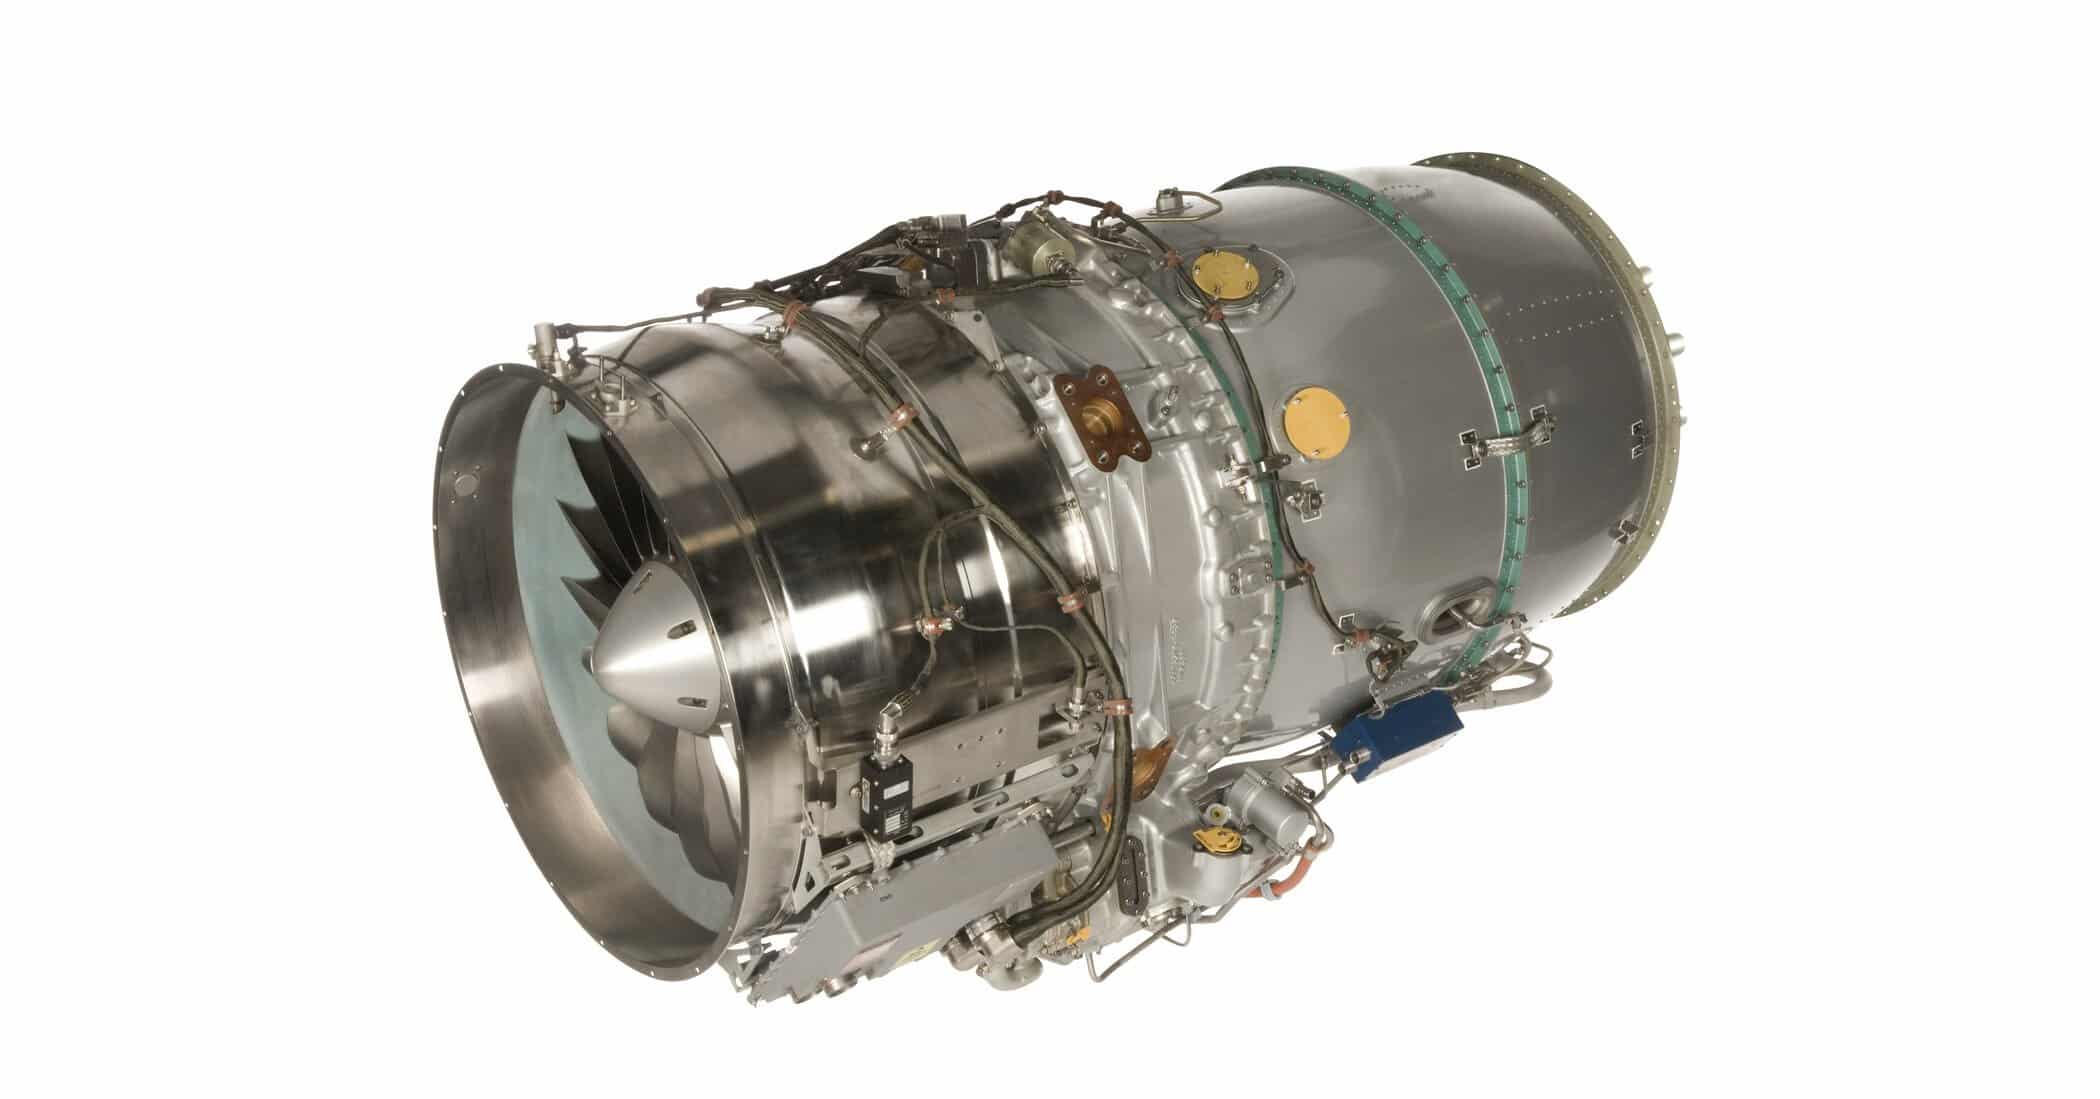 Duncan Aviation is Designated Overhaul Facility for Select PW300 and PW500 Business Aviation Engines